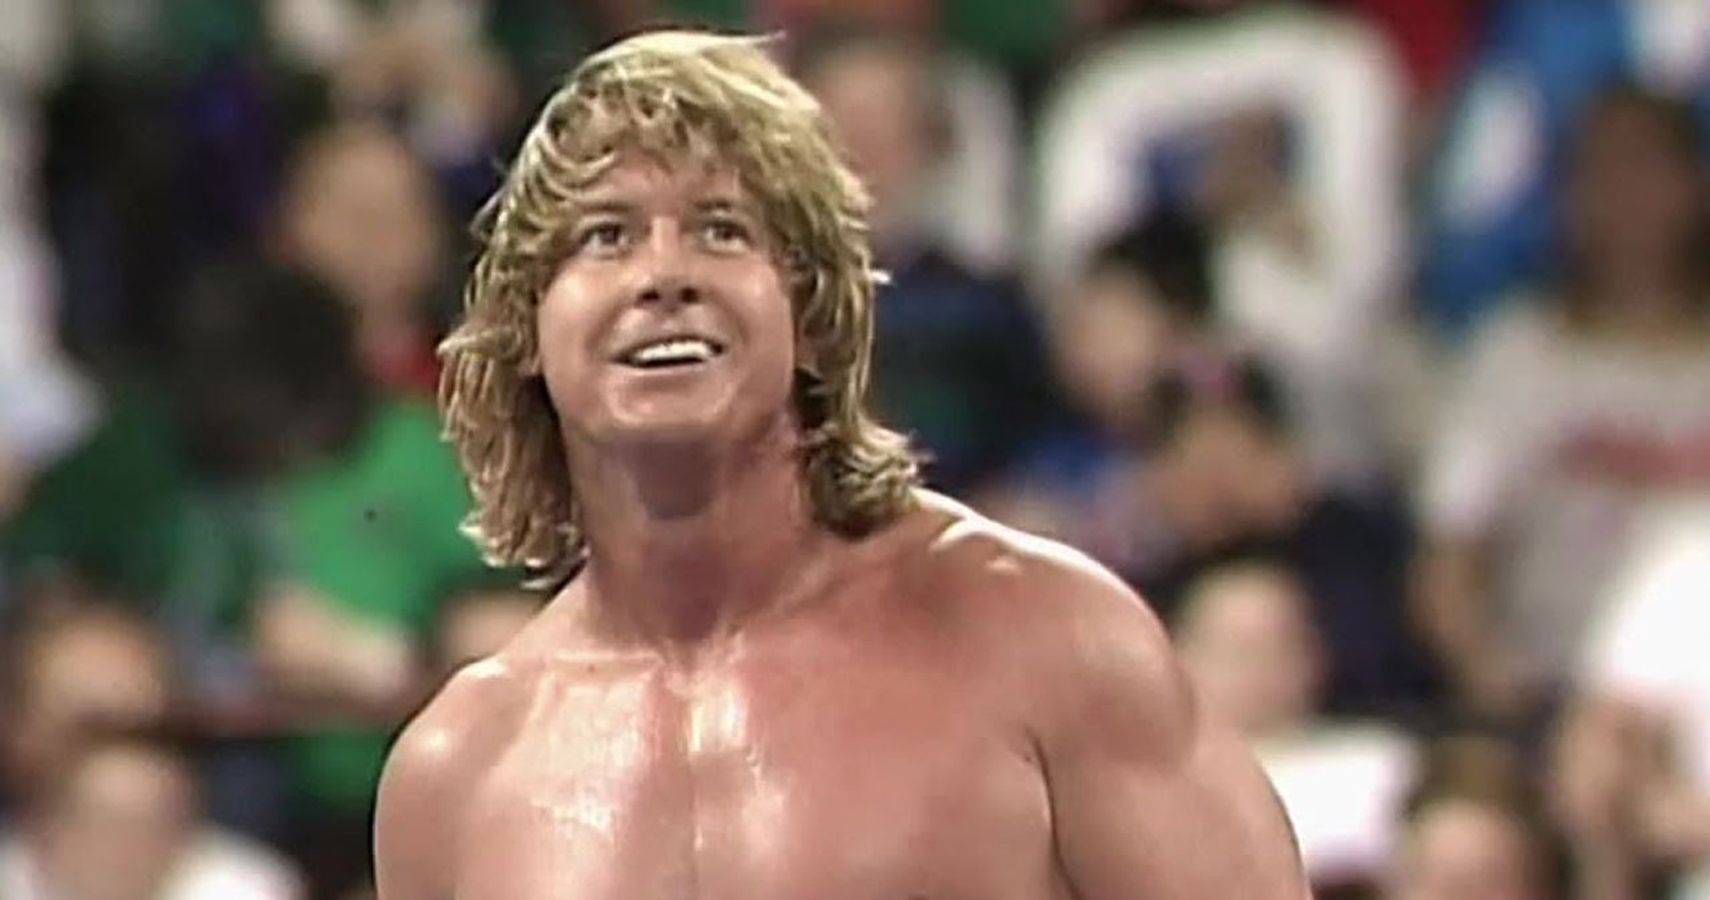 You Deserve It: 10 Wrestlers That Deserved A Title Win That Never Came